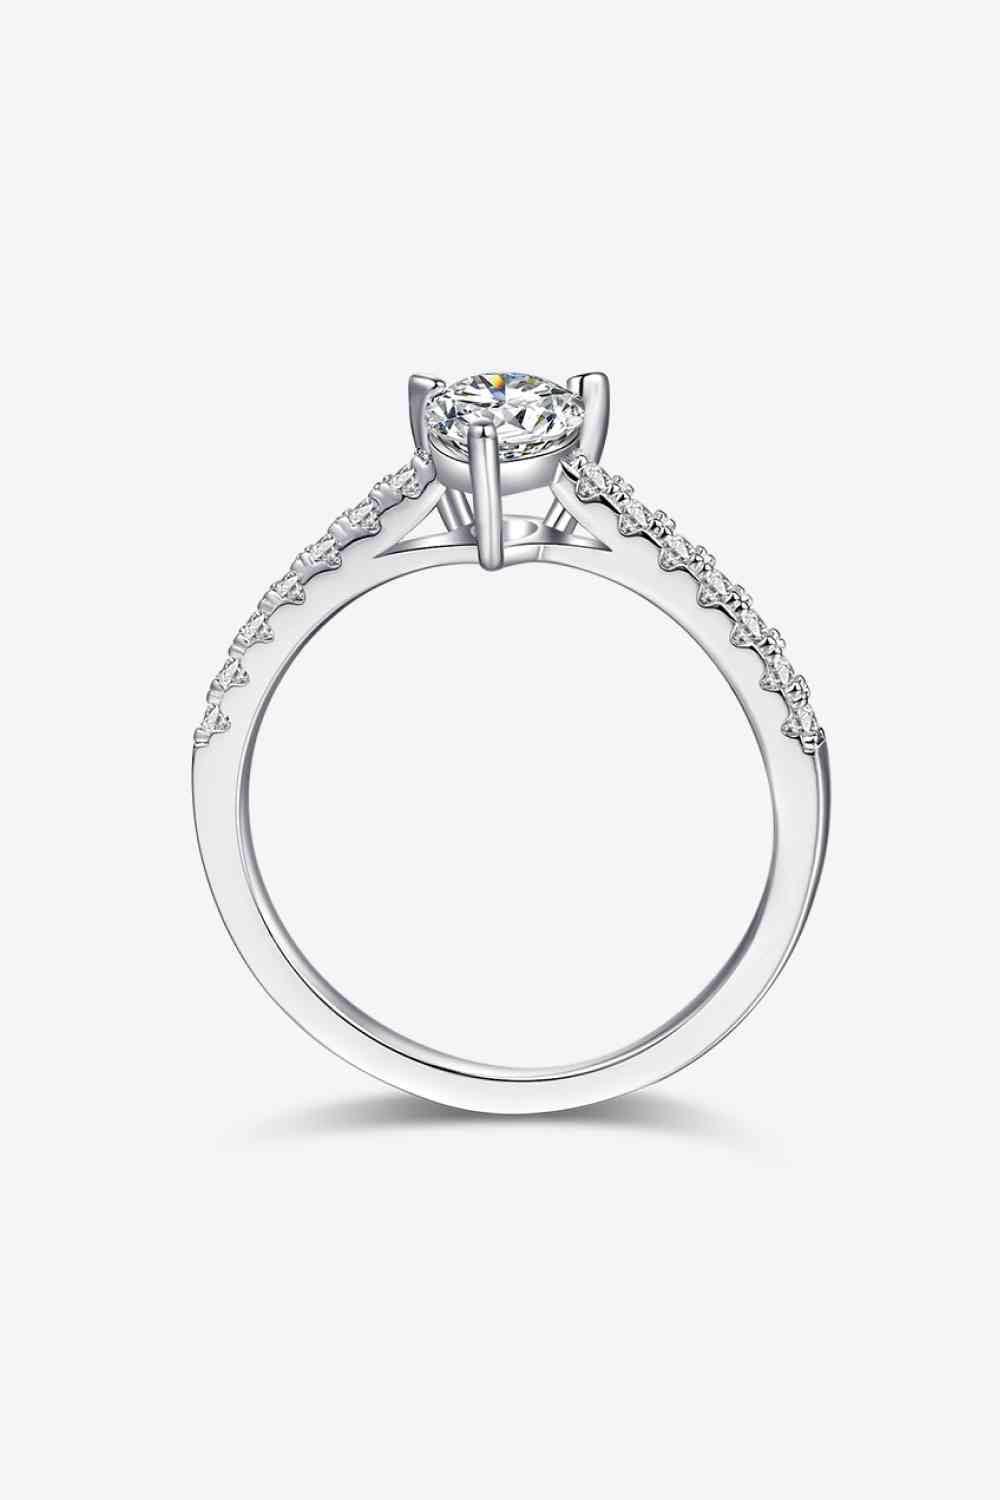 a white gold engagement ring with diamonds on the side